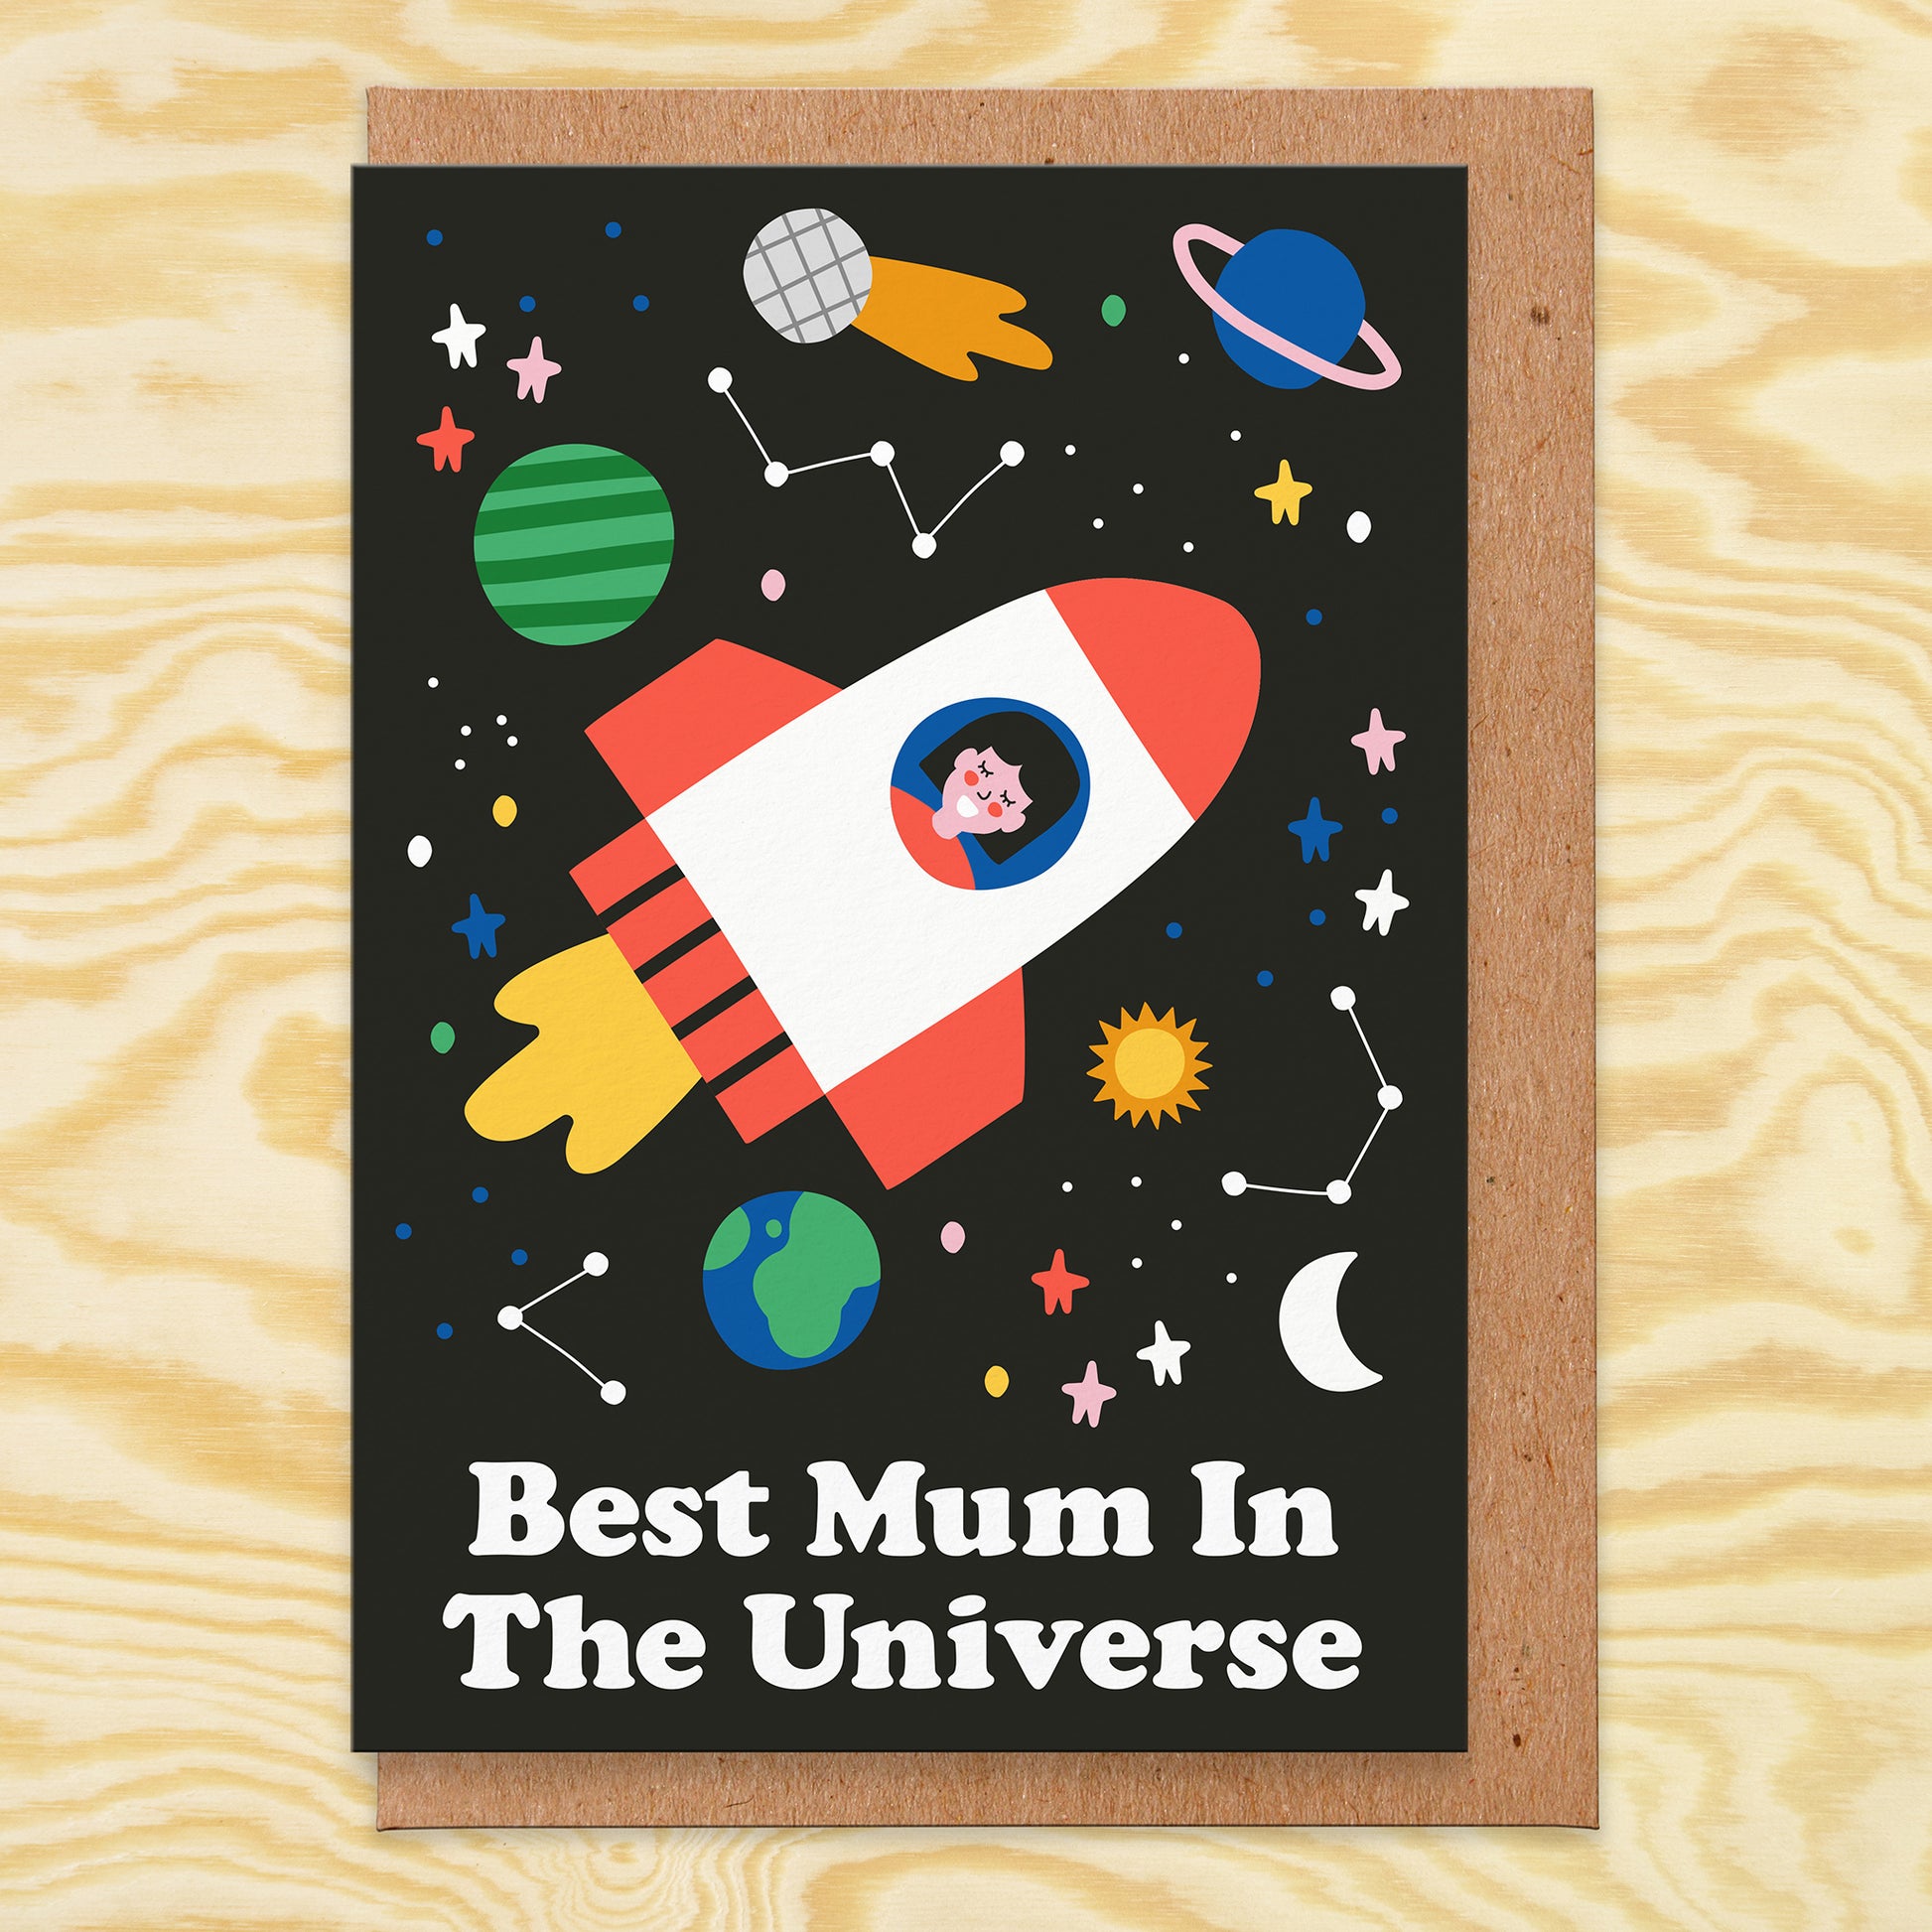 Greetings card with illustration of rocket in space and says best mum in universe.